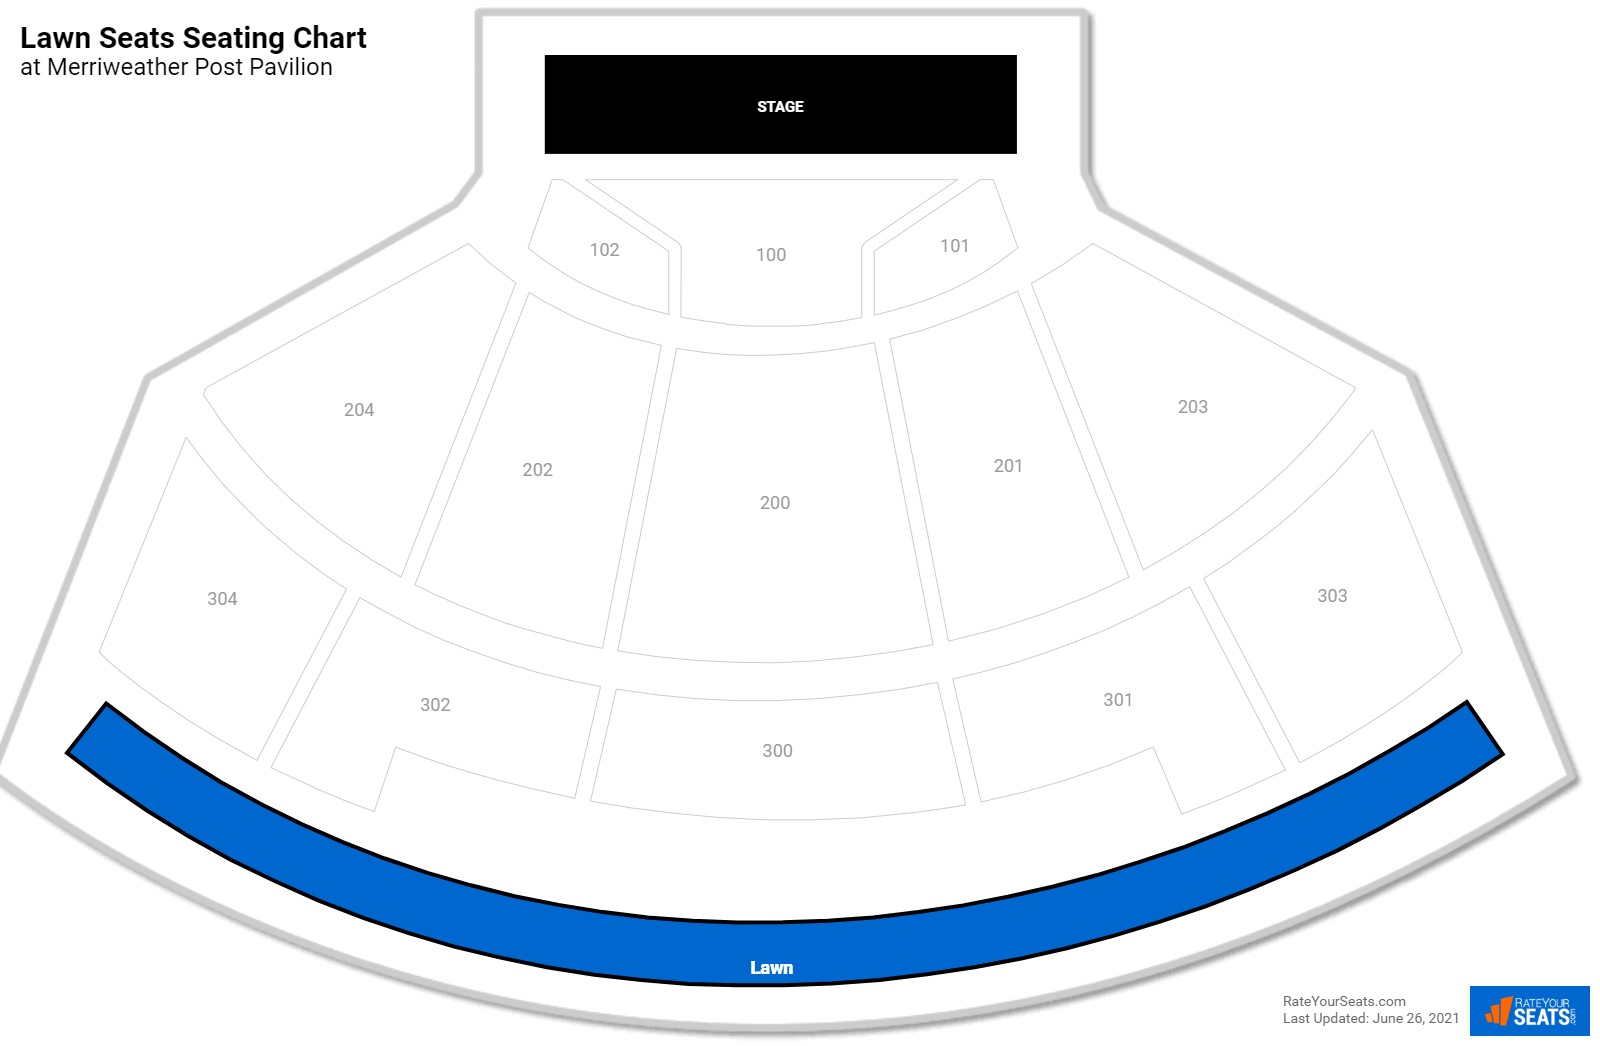 Concert Lawn Seats Seating Chart at Merriweather Post Pavilion